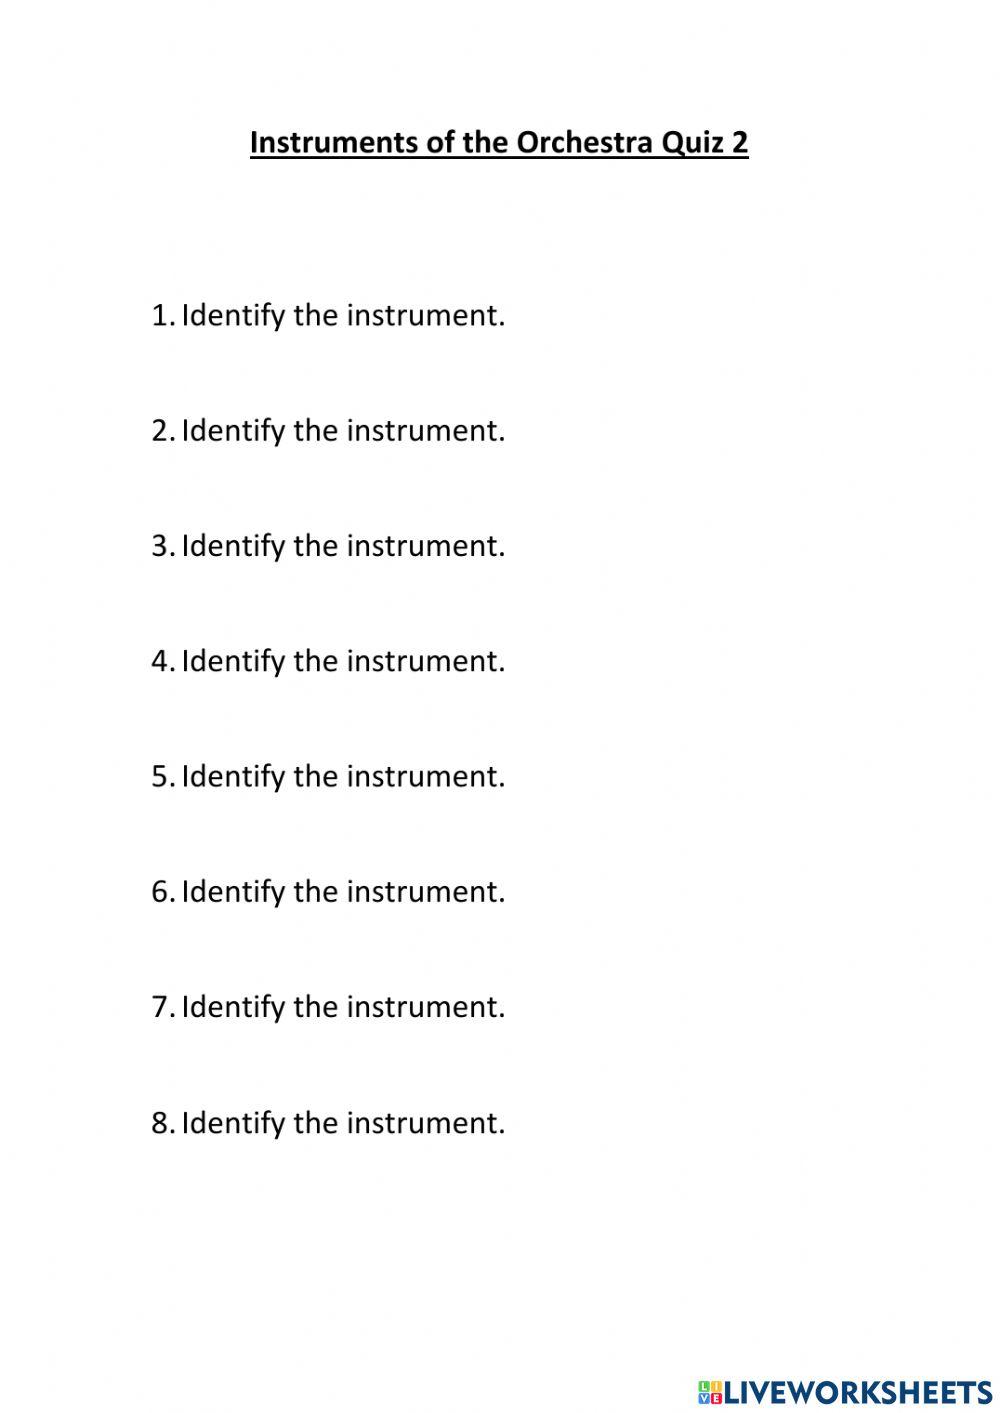 Instruments of the Orchestra Quiz 2